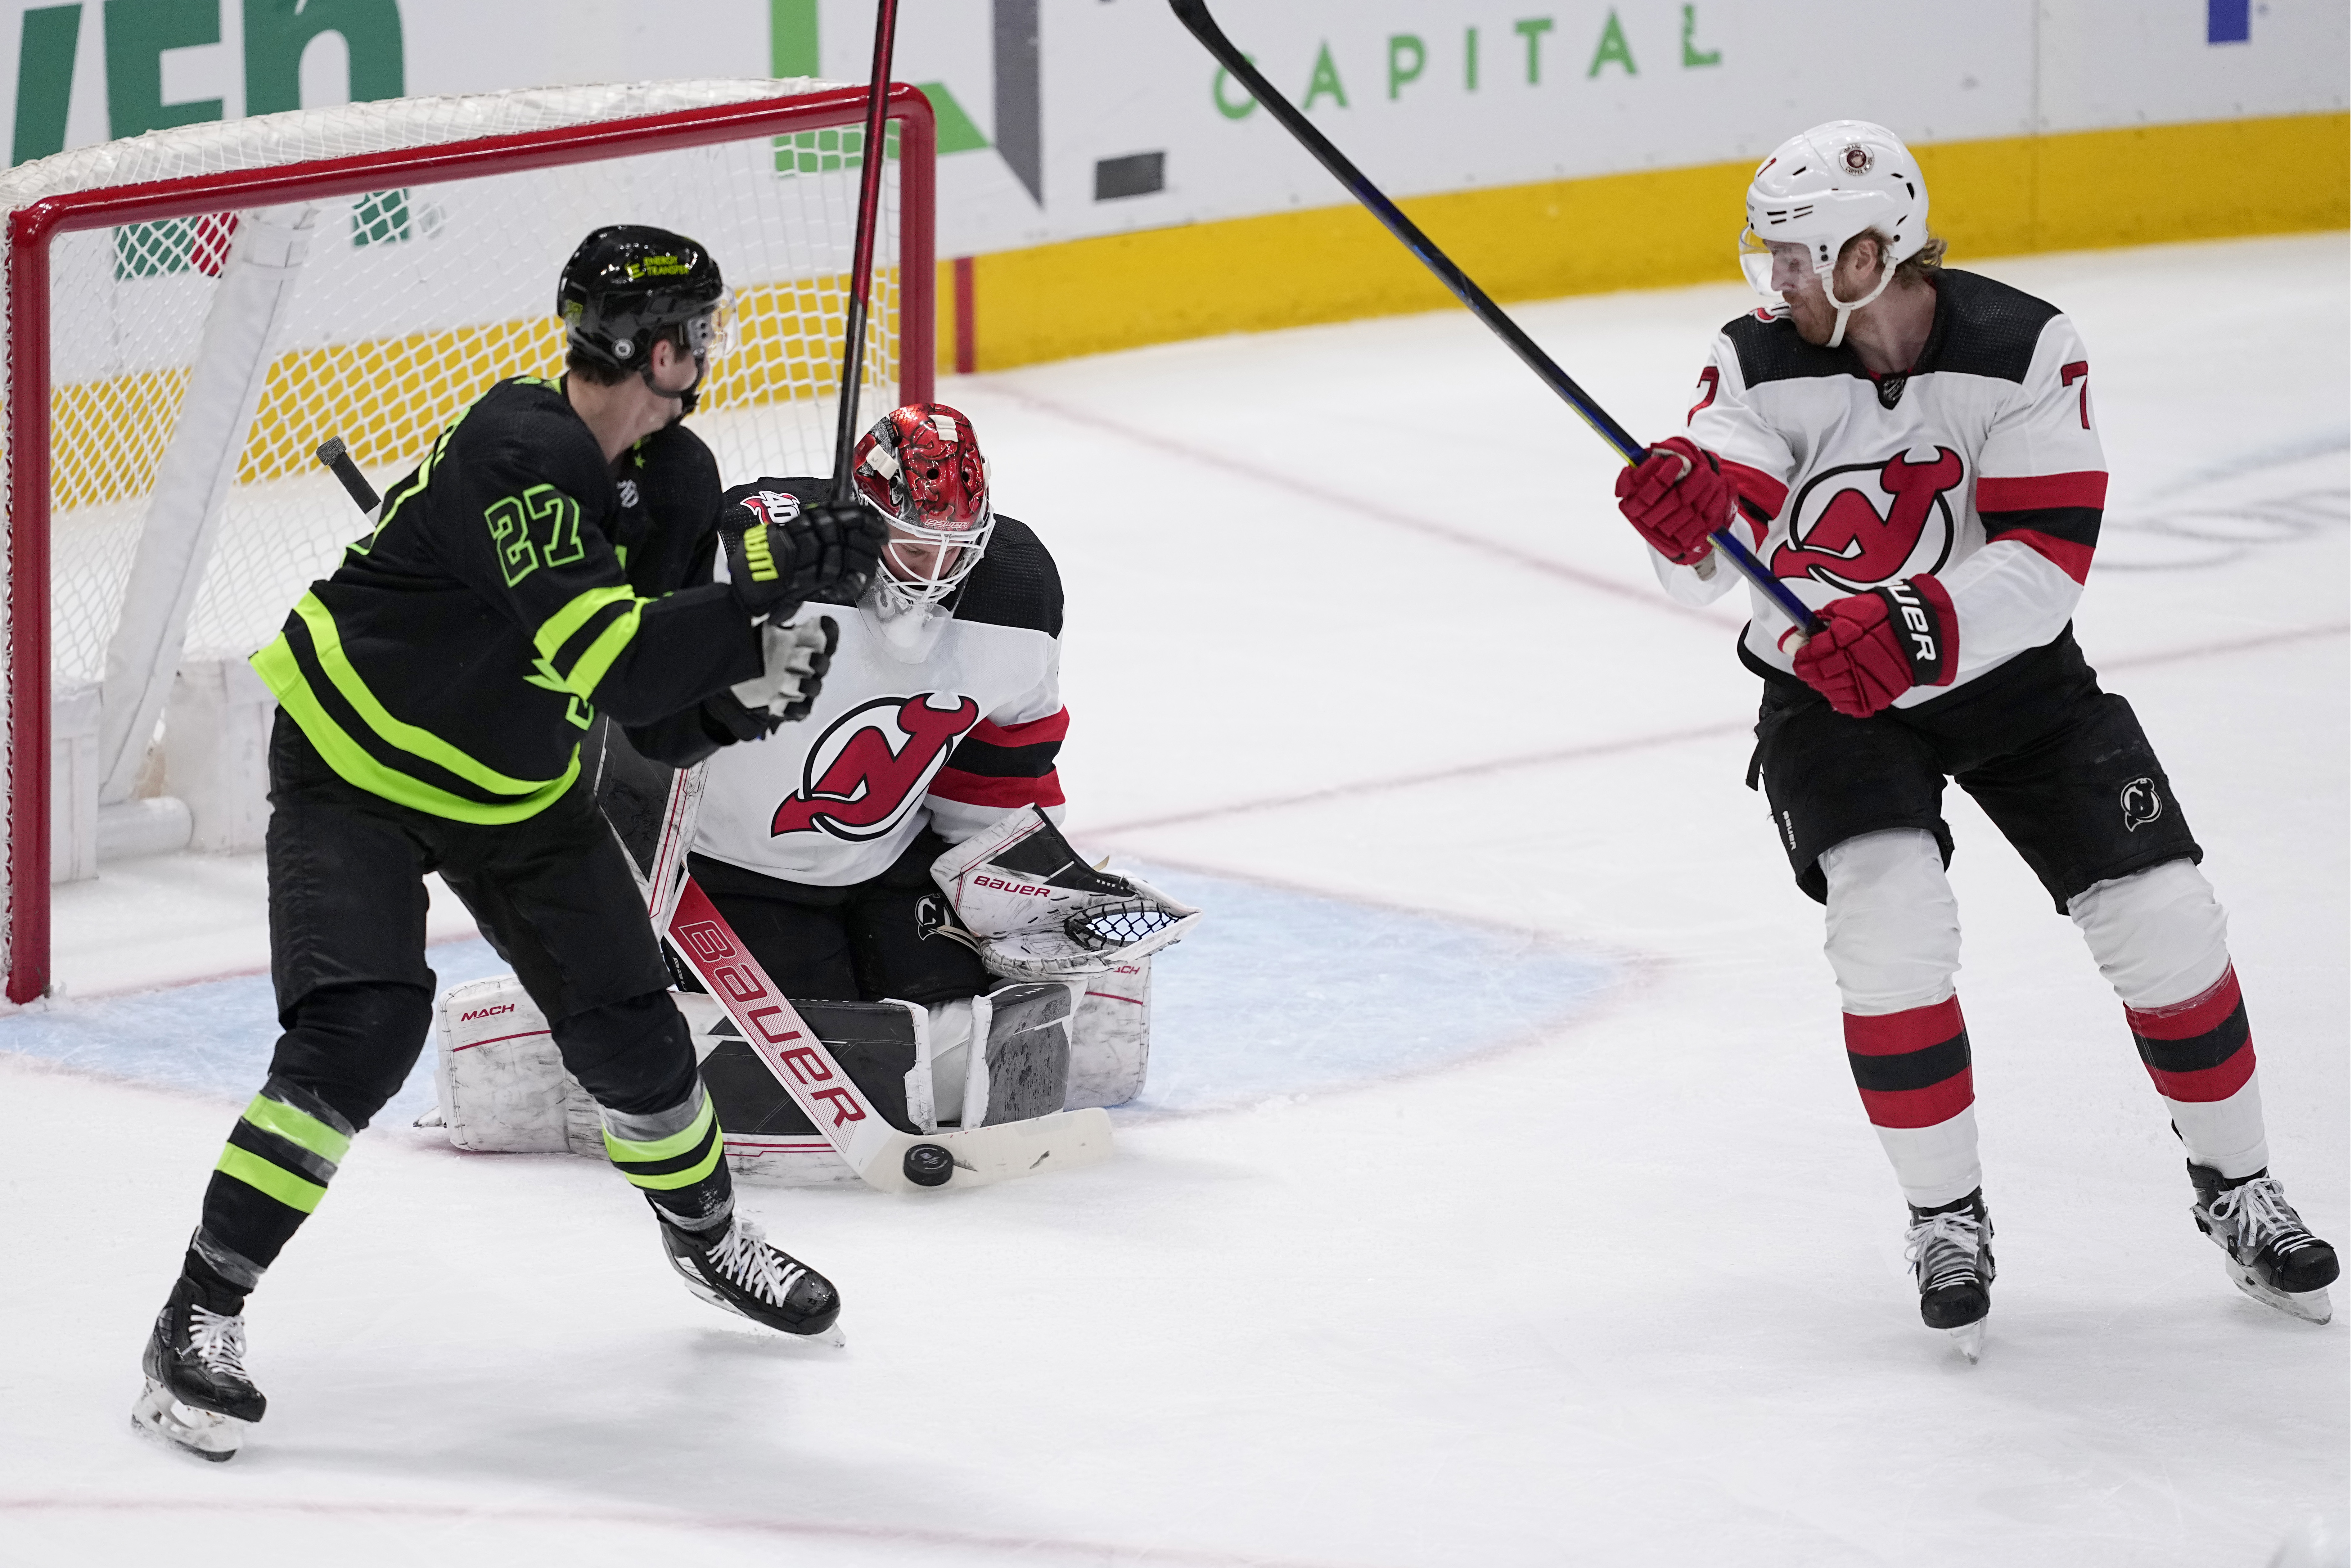 Timo Meier scores in shootout, Devils beat Capitals 3-2 - WTOP News